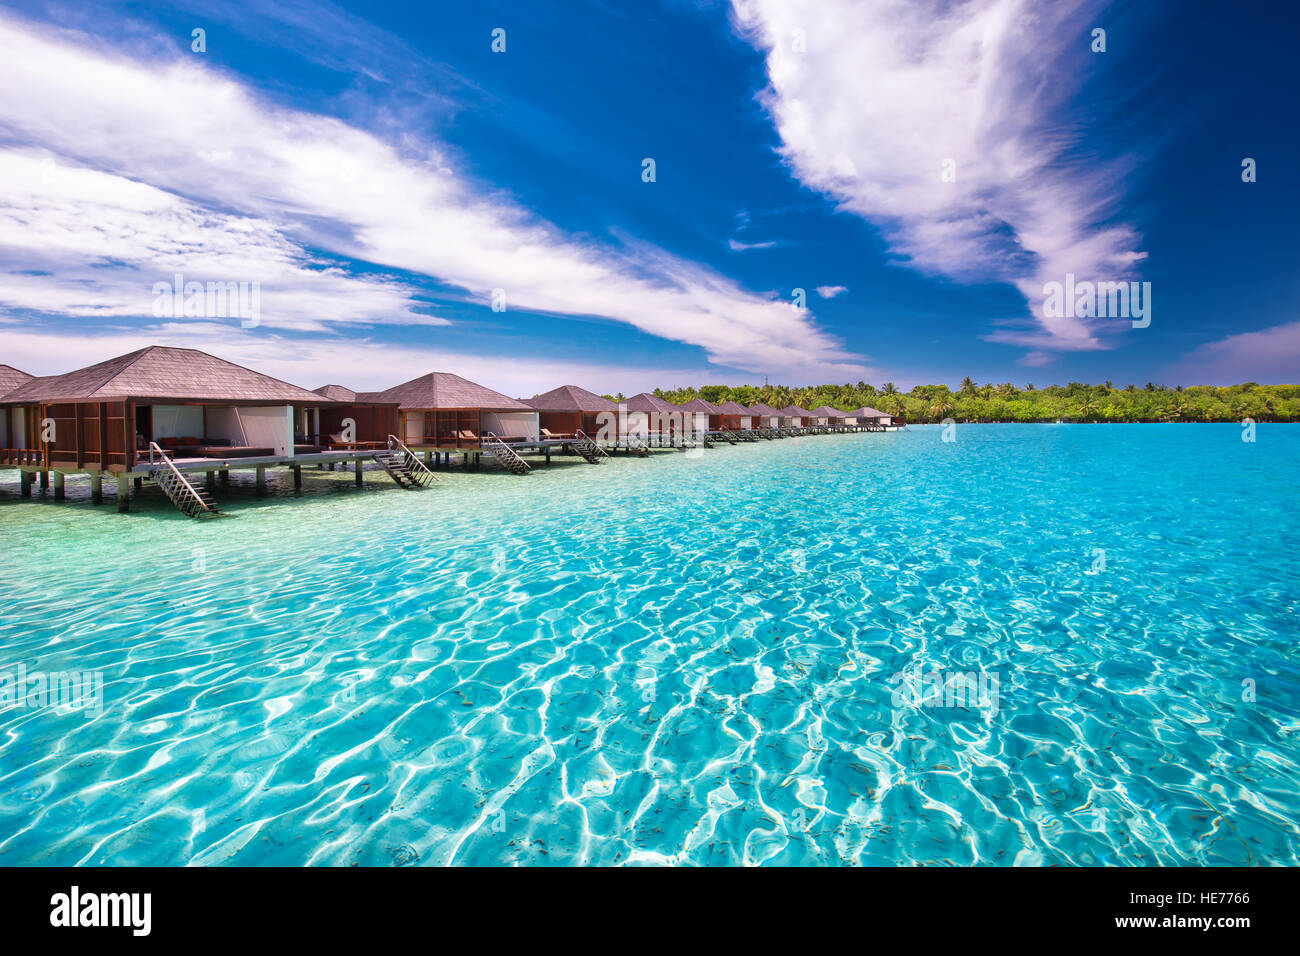 Luxurious water bungalows on tropical island with tourquise clear water. Stock Photo